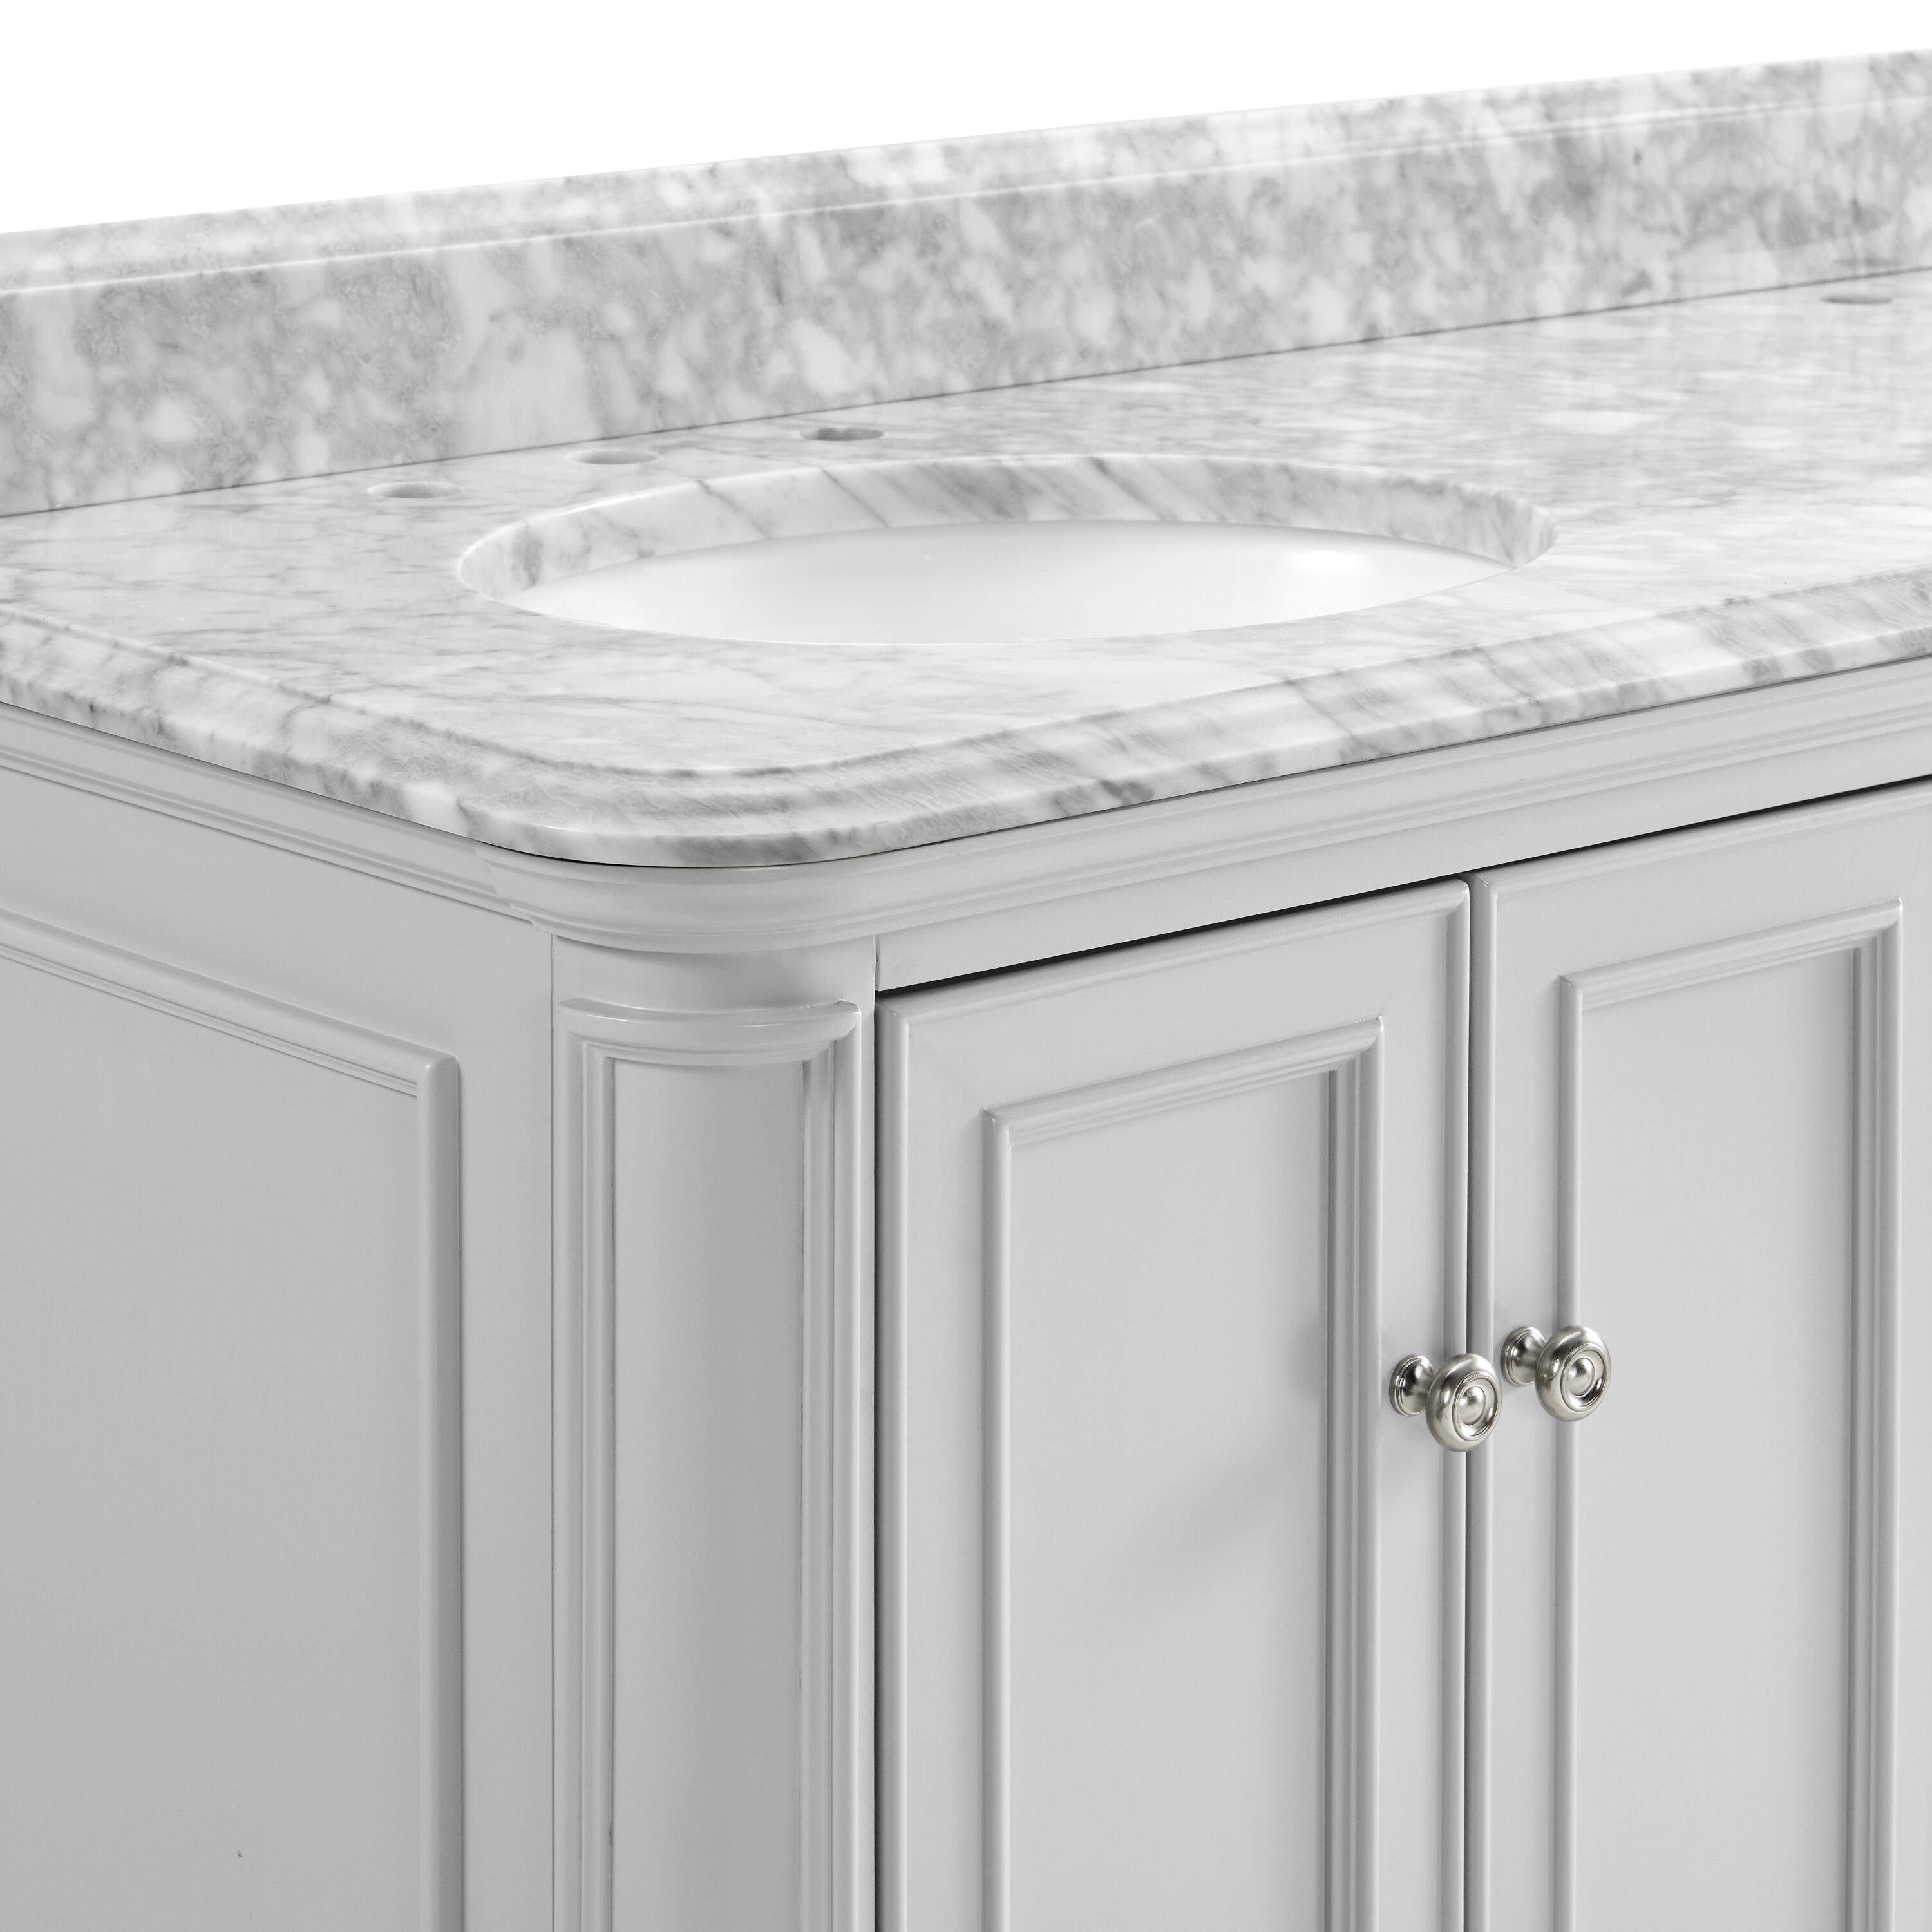 ᐅ【WOODBRIDGE London 60Bathroom Vanity with Engineered Marble White Carrara  Color top 8 faucet holes, Double Rectangle Undermount Sinks, 4 Soft Closing  Doors and 3 full Extension Dovetail Drawers